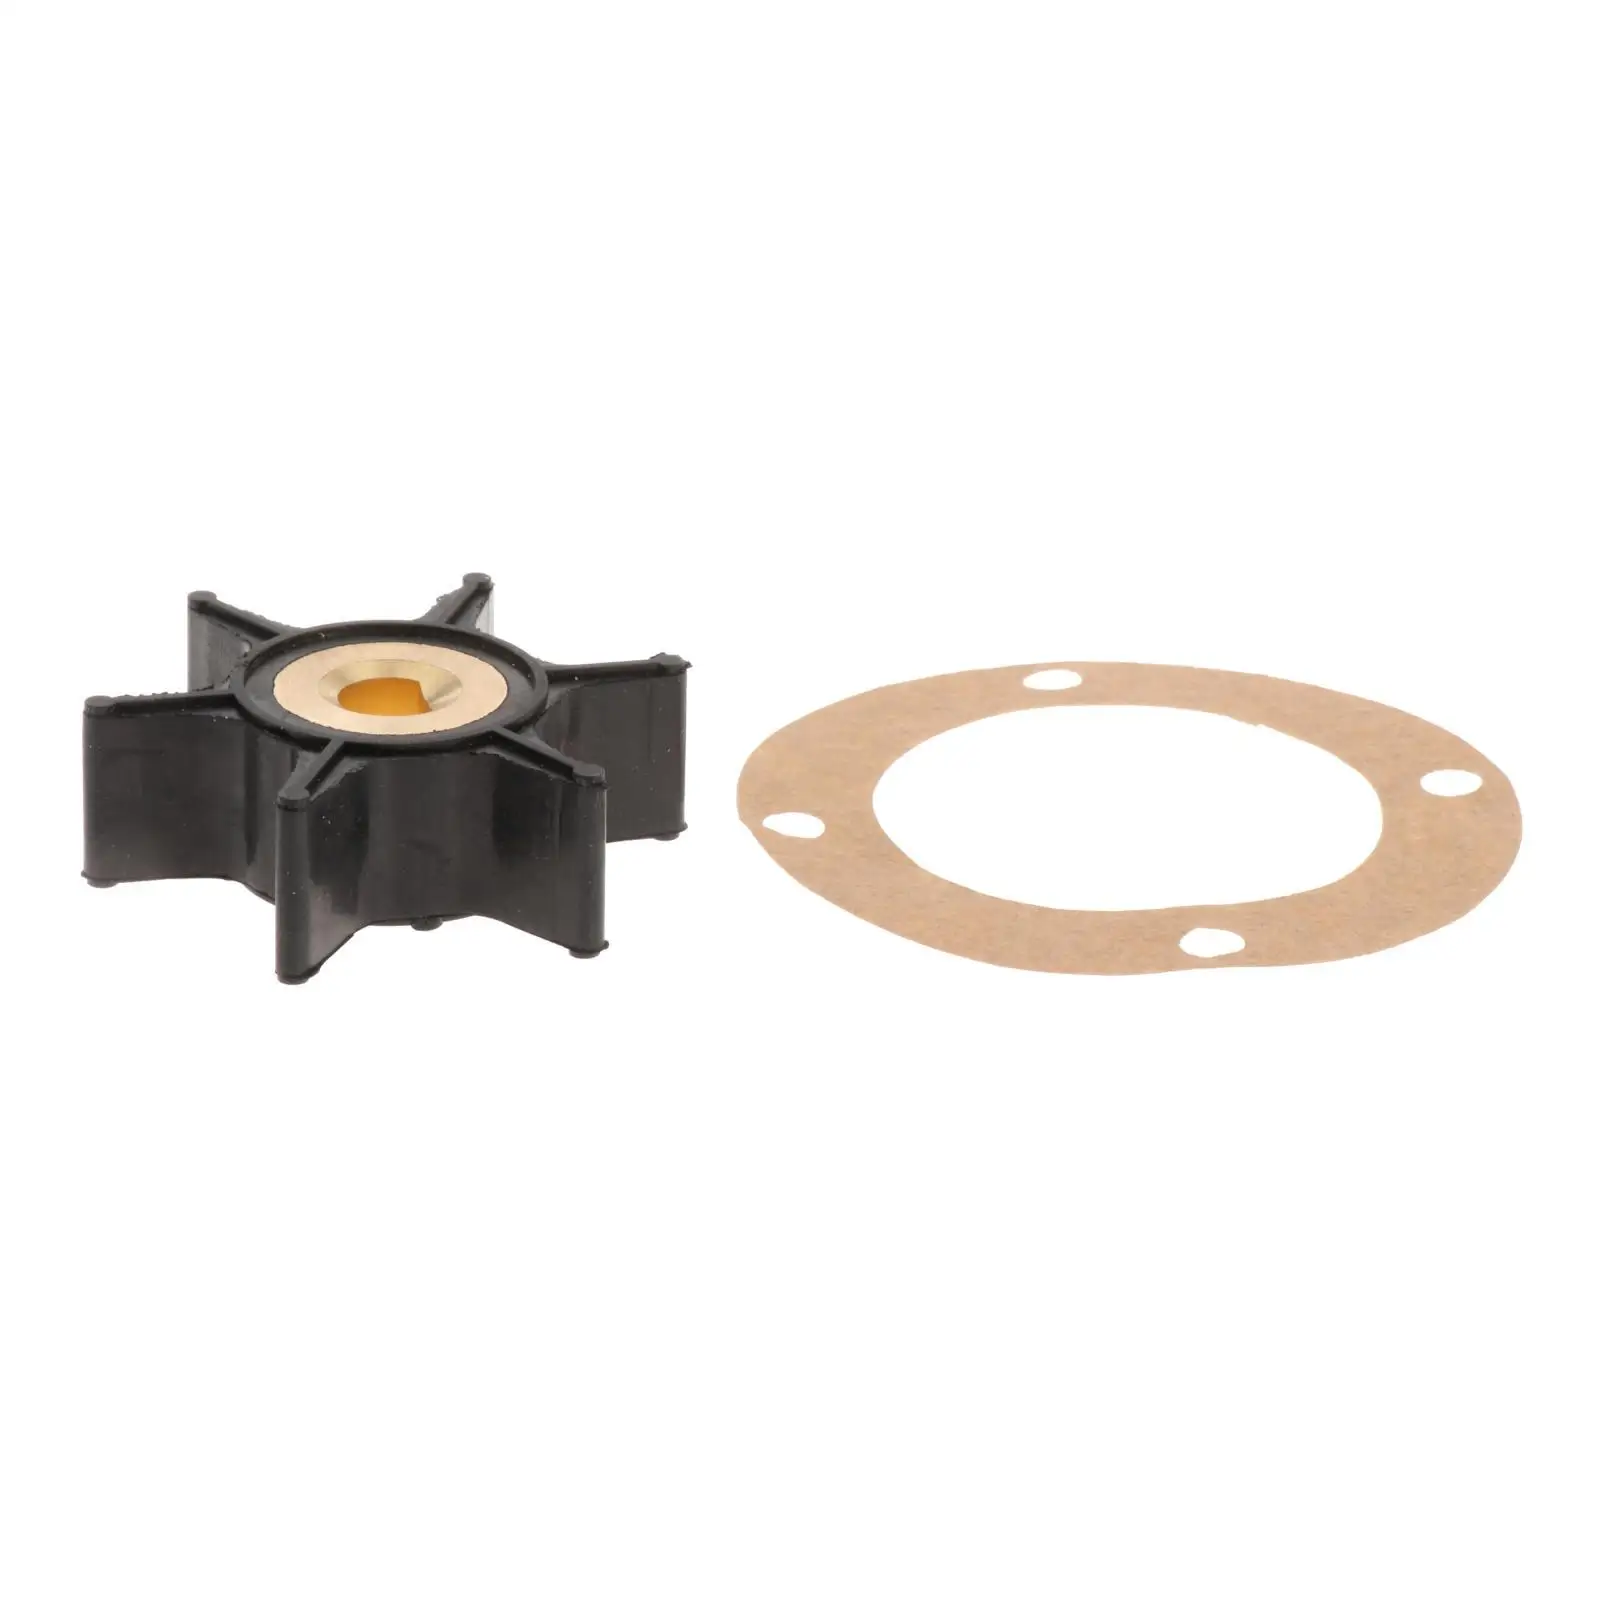 2 Pieces Impeller and 4-Hole Gasket Kit Impeller Kit Fit for Onan 131-0386 170-3172